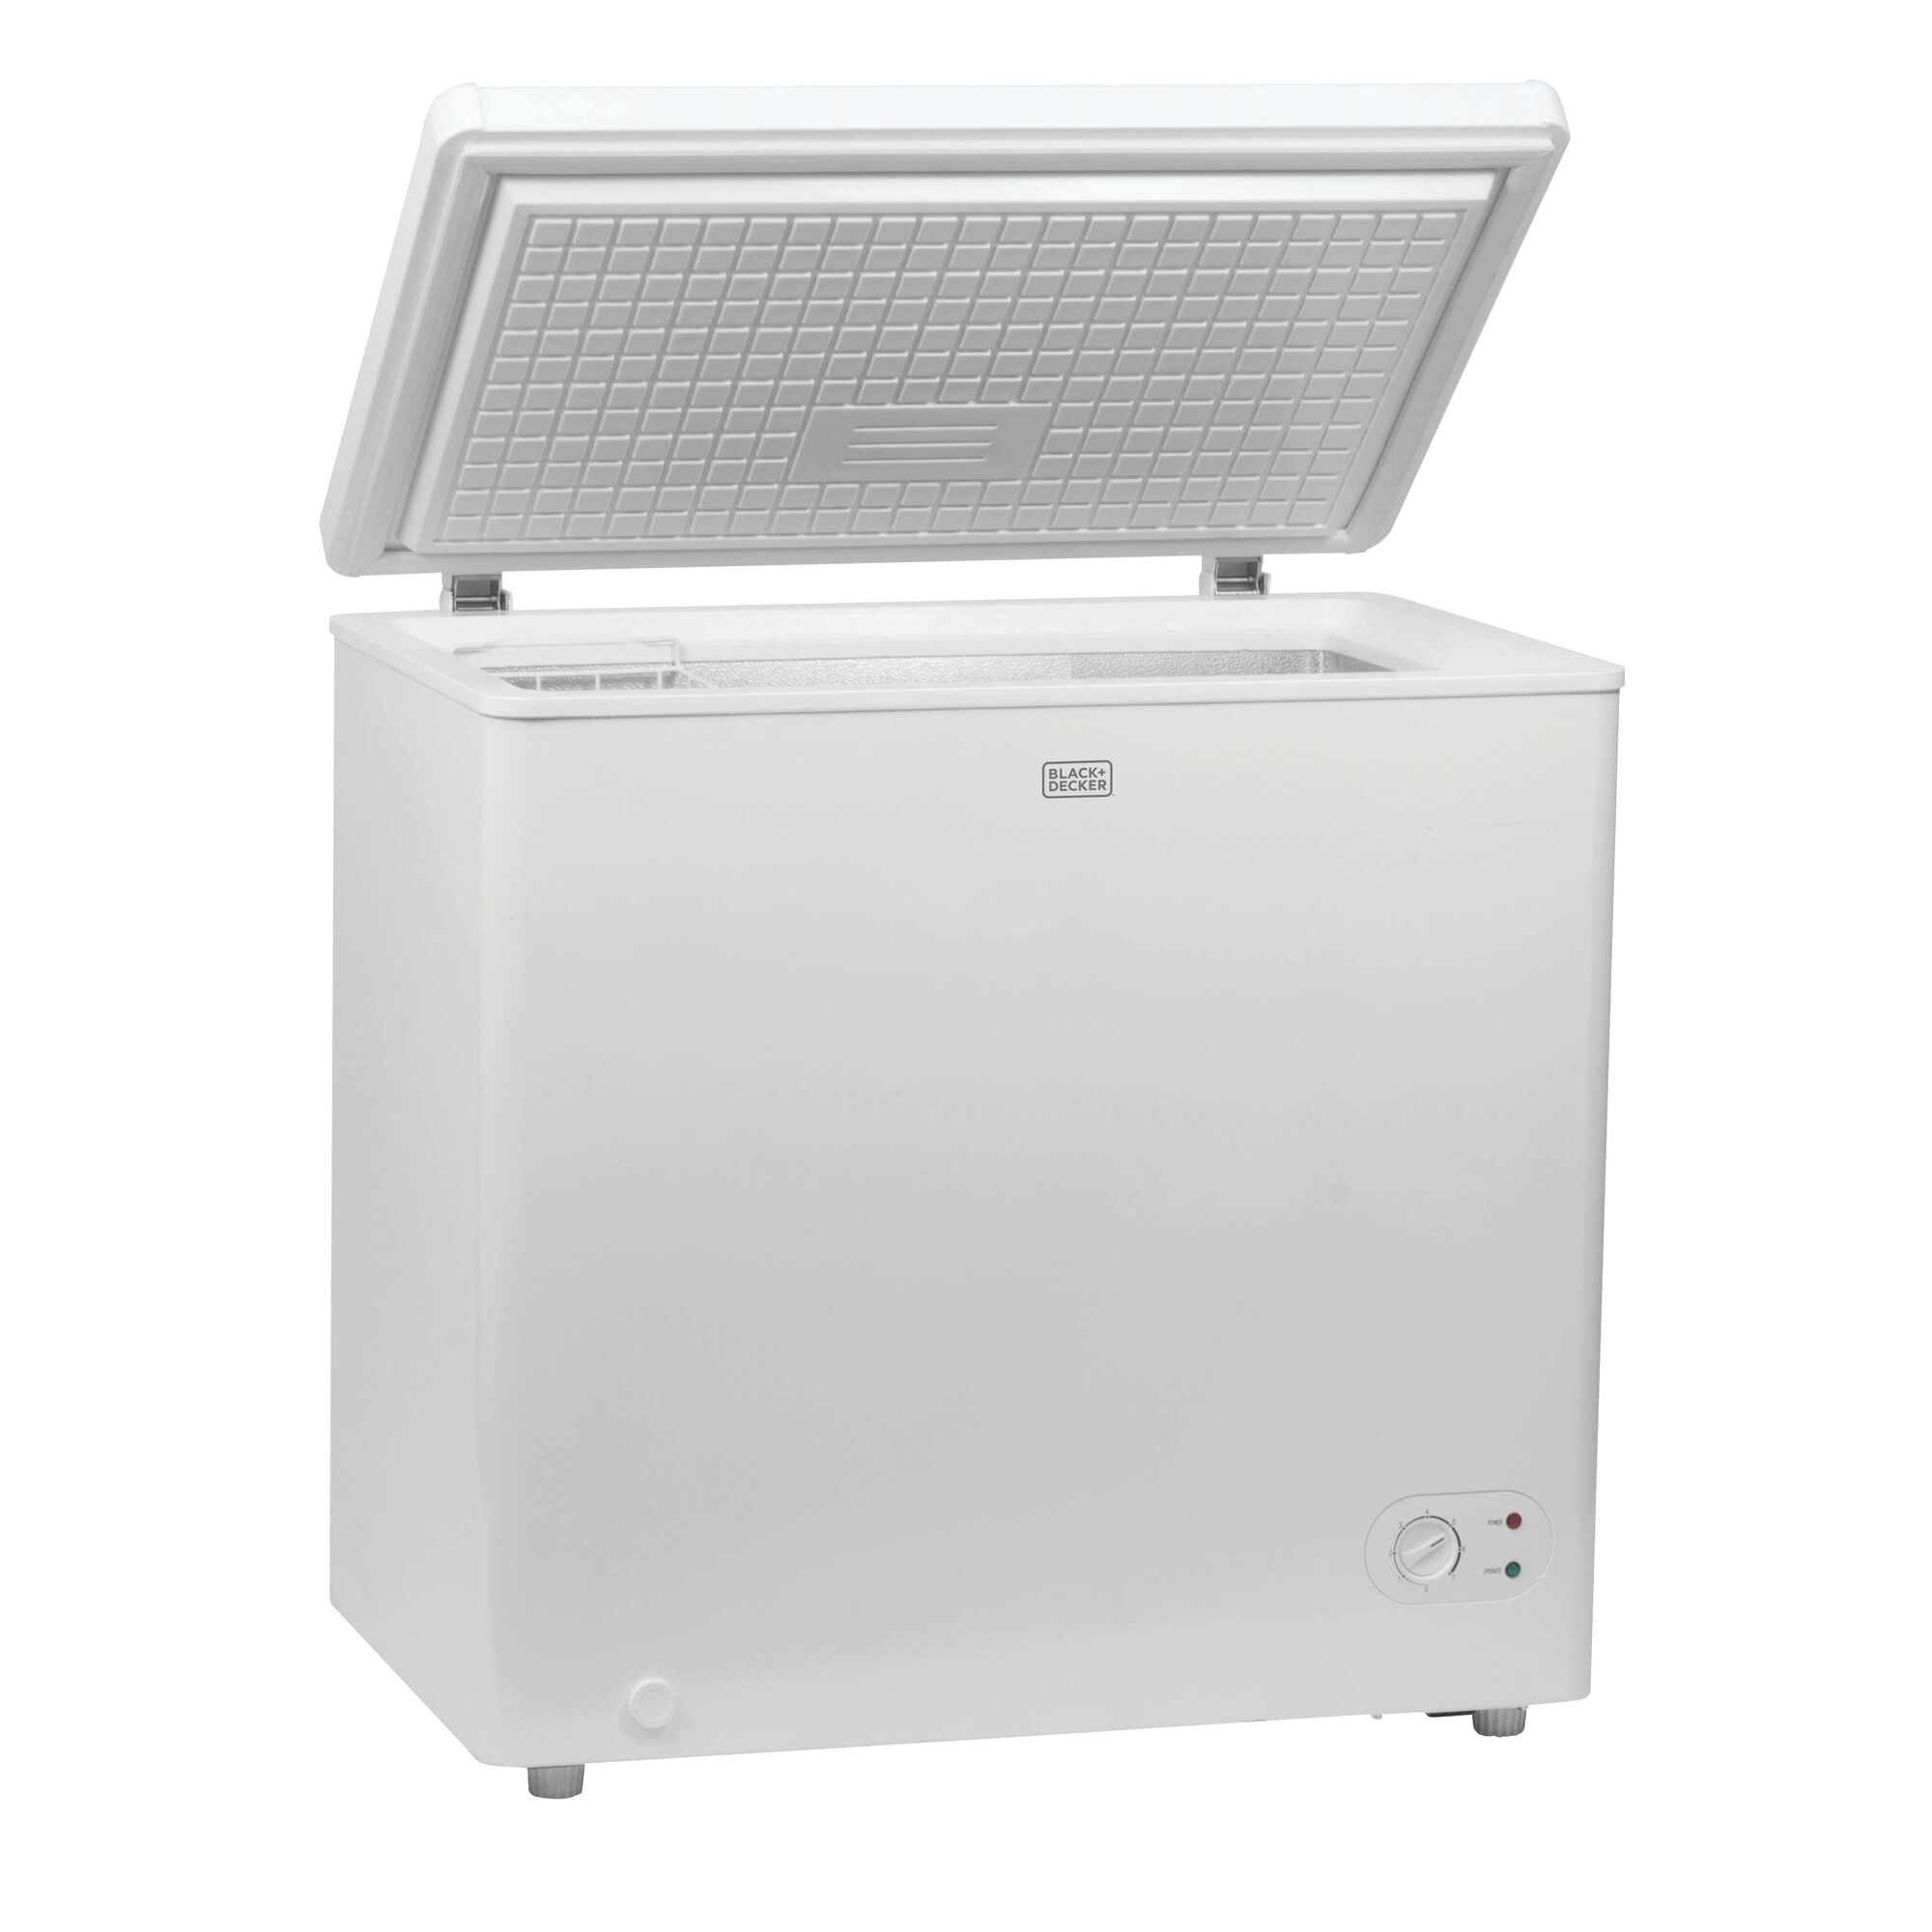 5.5 Cubic foot  Chest Freezer with lid open.